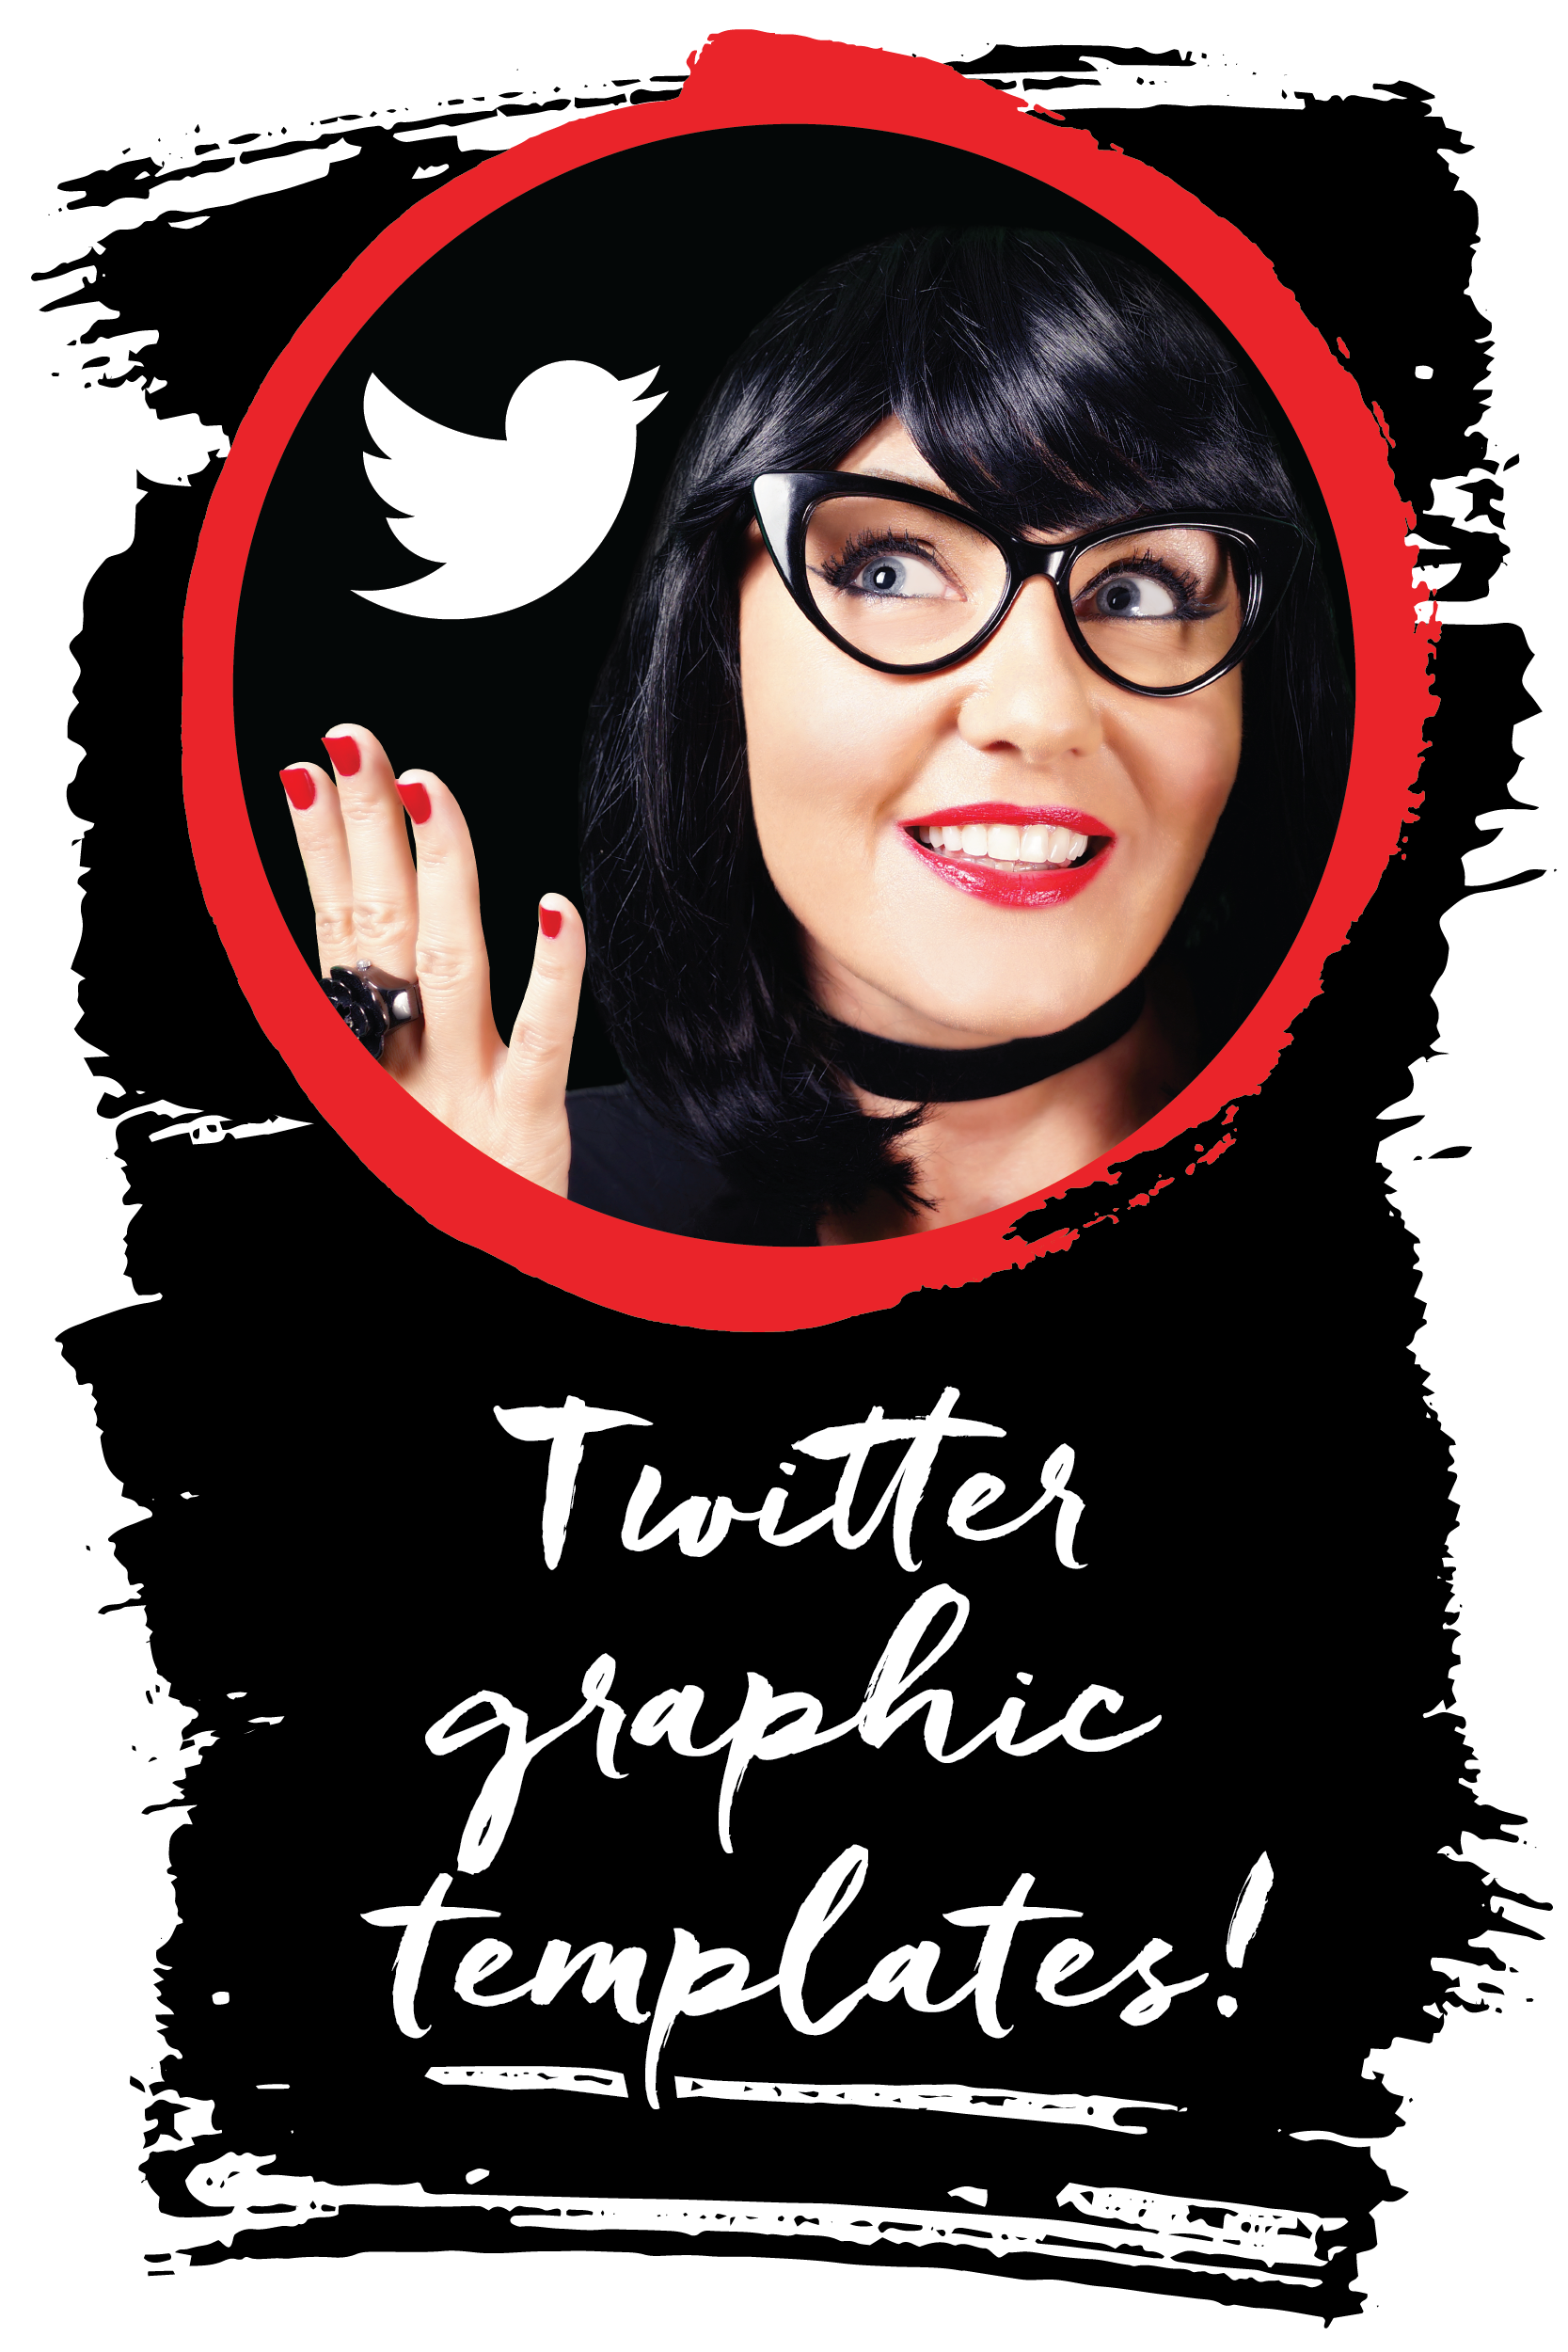 FREE Twitter templates! Click through to get your FREE Twitter graphic templates here! ~graphics grrrl